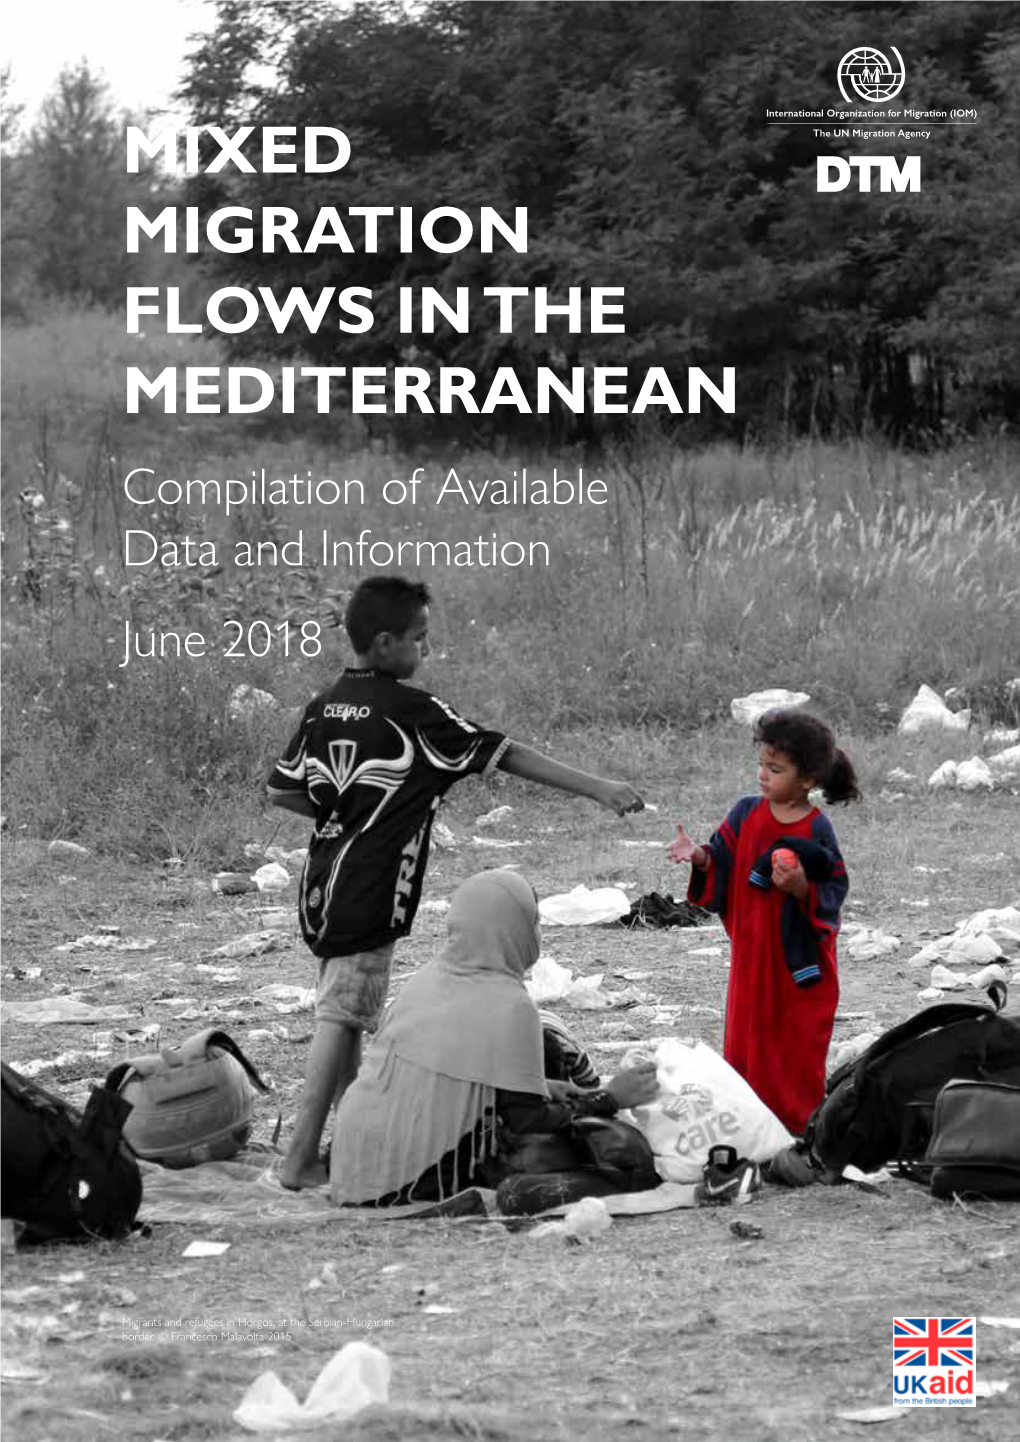 MIXED MIGRATION FLOWS in the MEDITERRANEAN Compilation of Available Data and Information June 2018